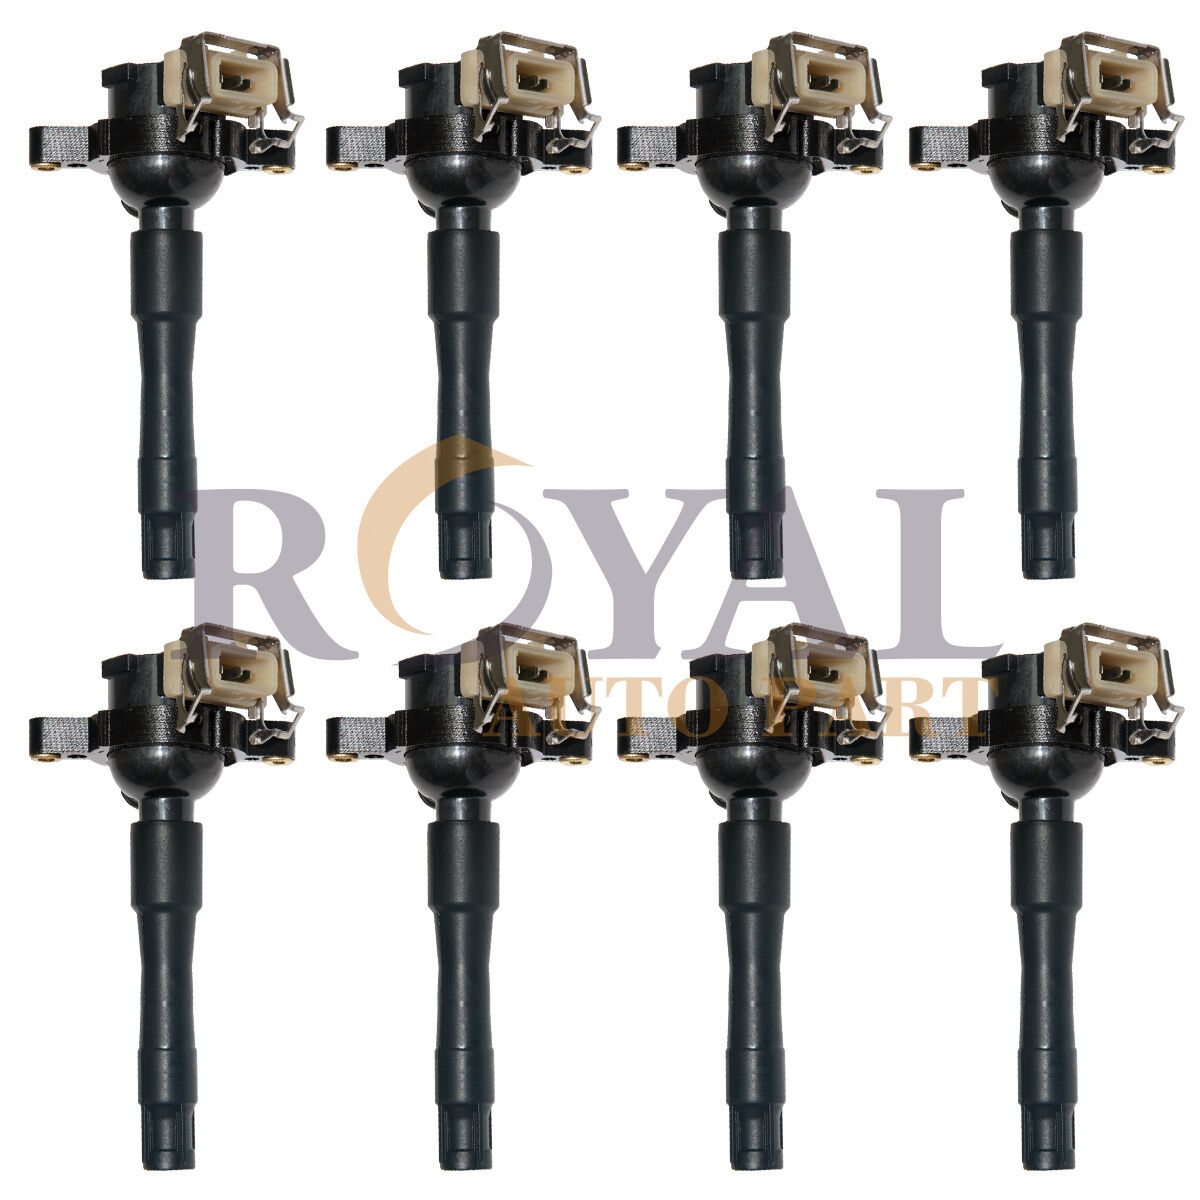 8x Ignition Coil for 94-05 BMW 3 5 Series M5 X5 Z8 740 540 i iL 840 Ci IC08